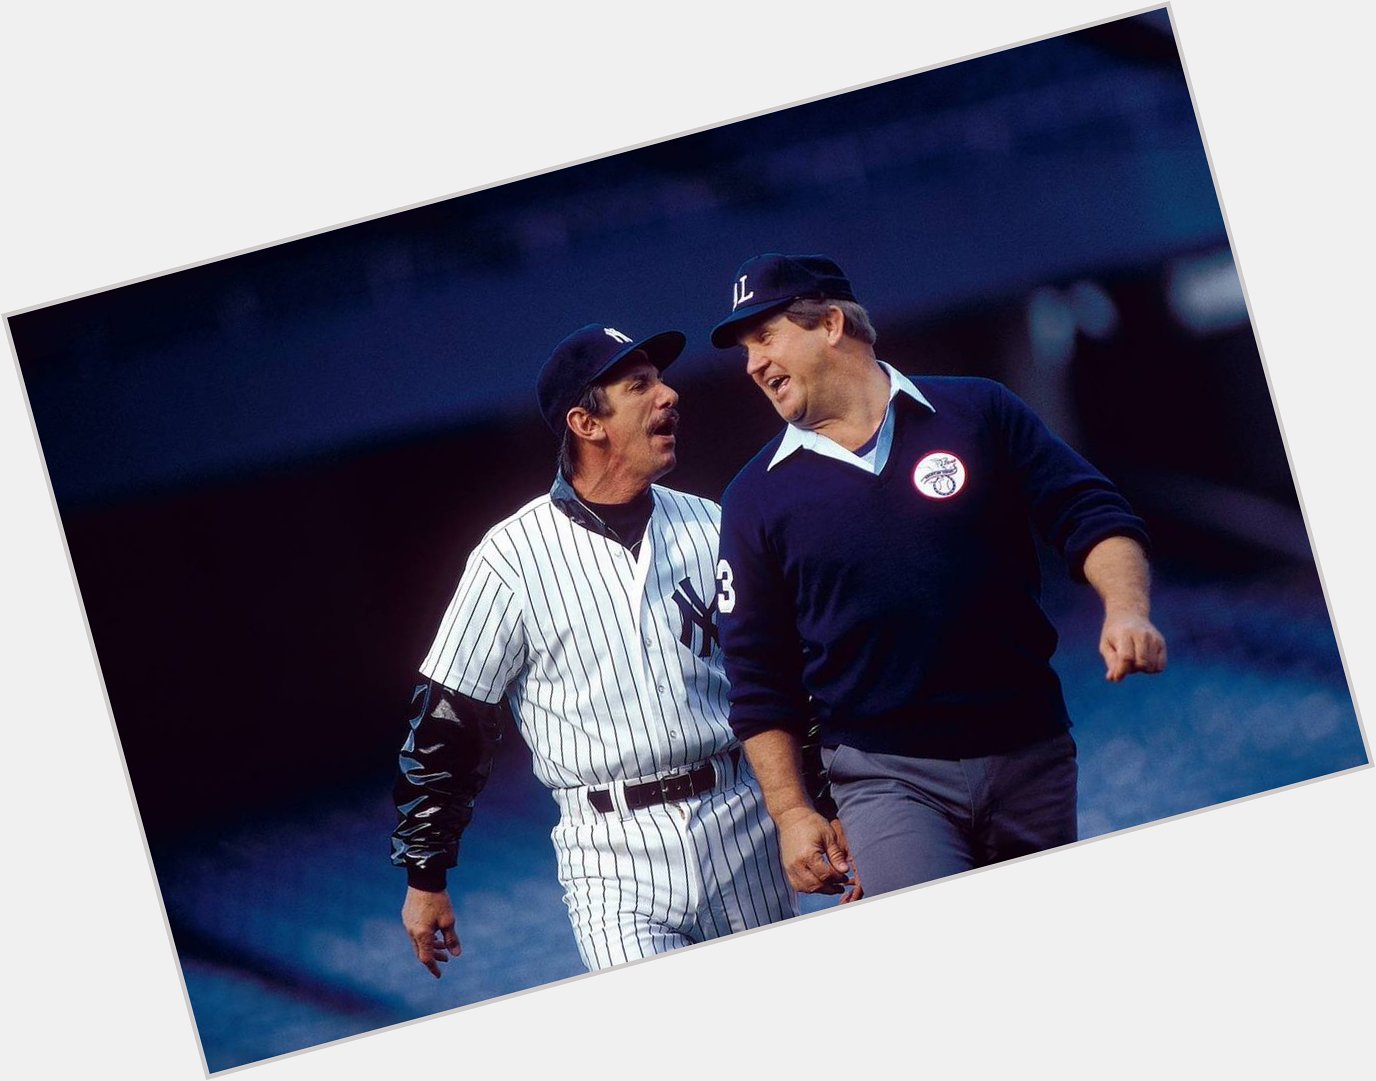 Happy Birthday to Billy Martin(left), who would have turned 89 today! 